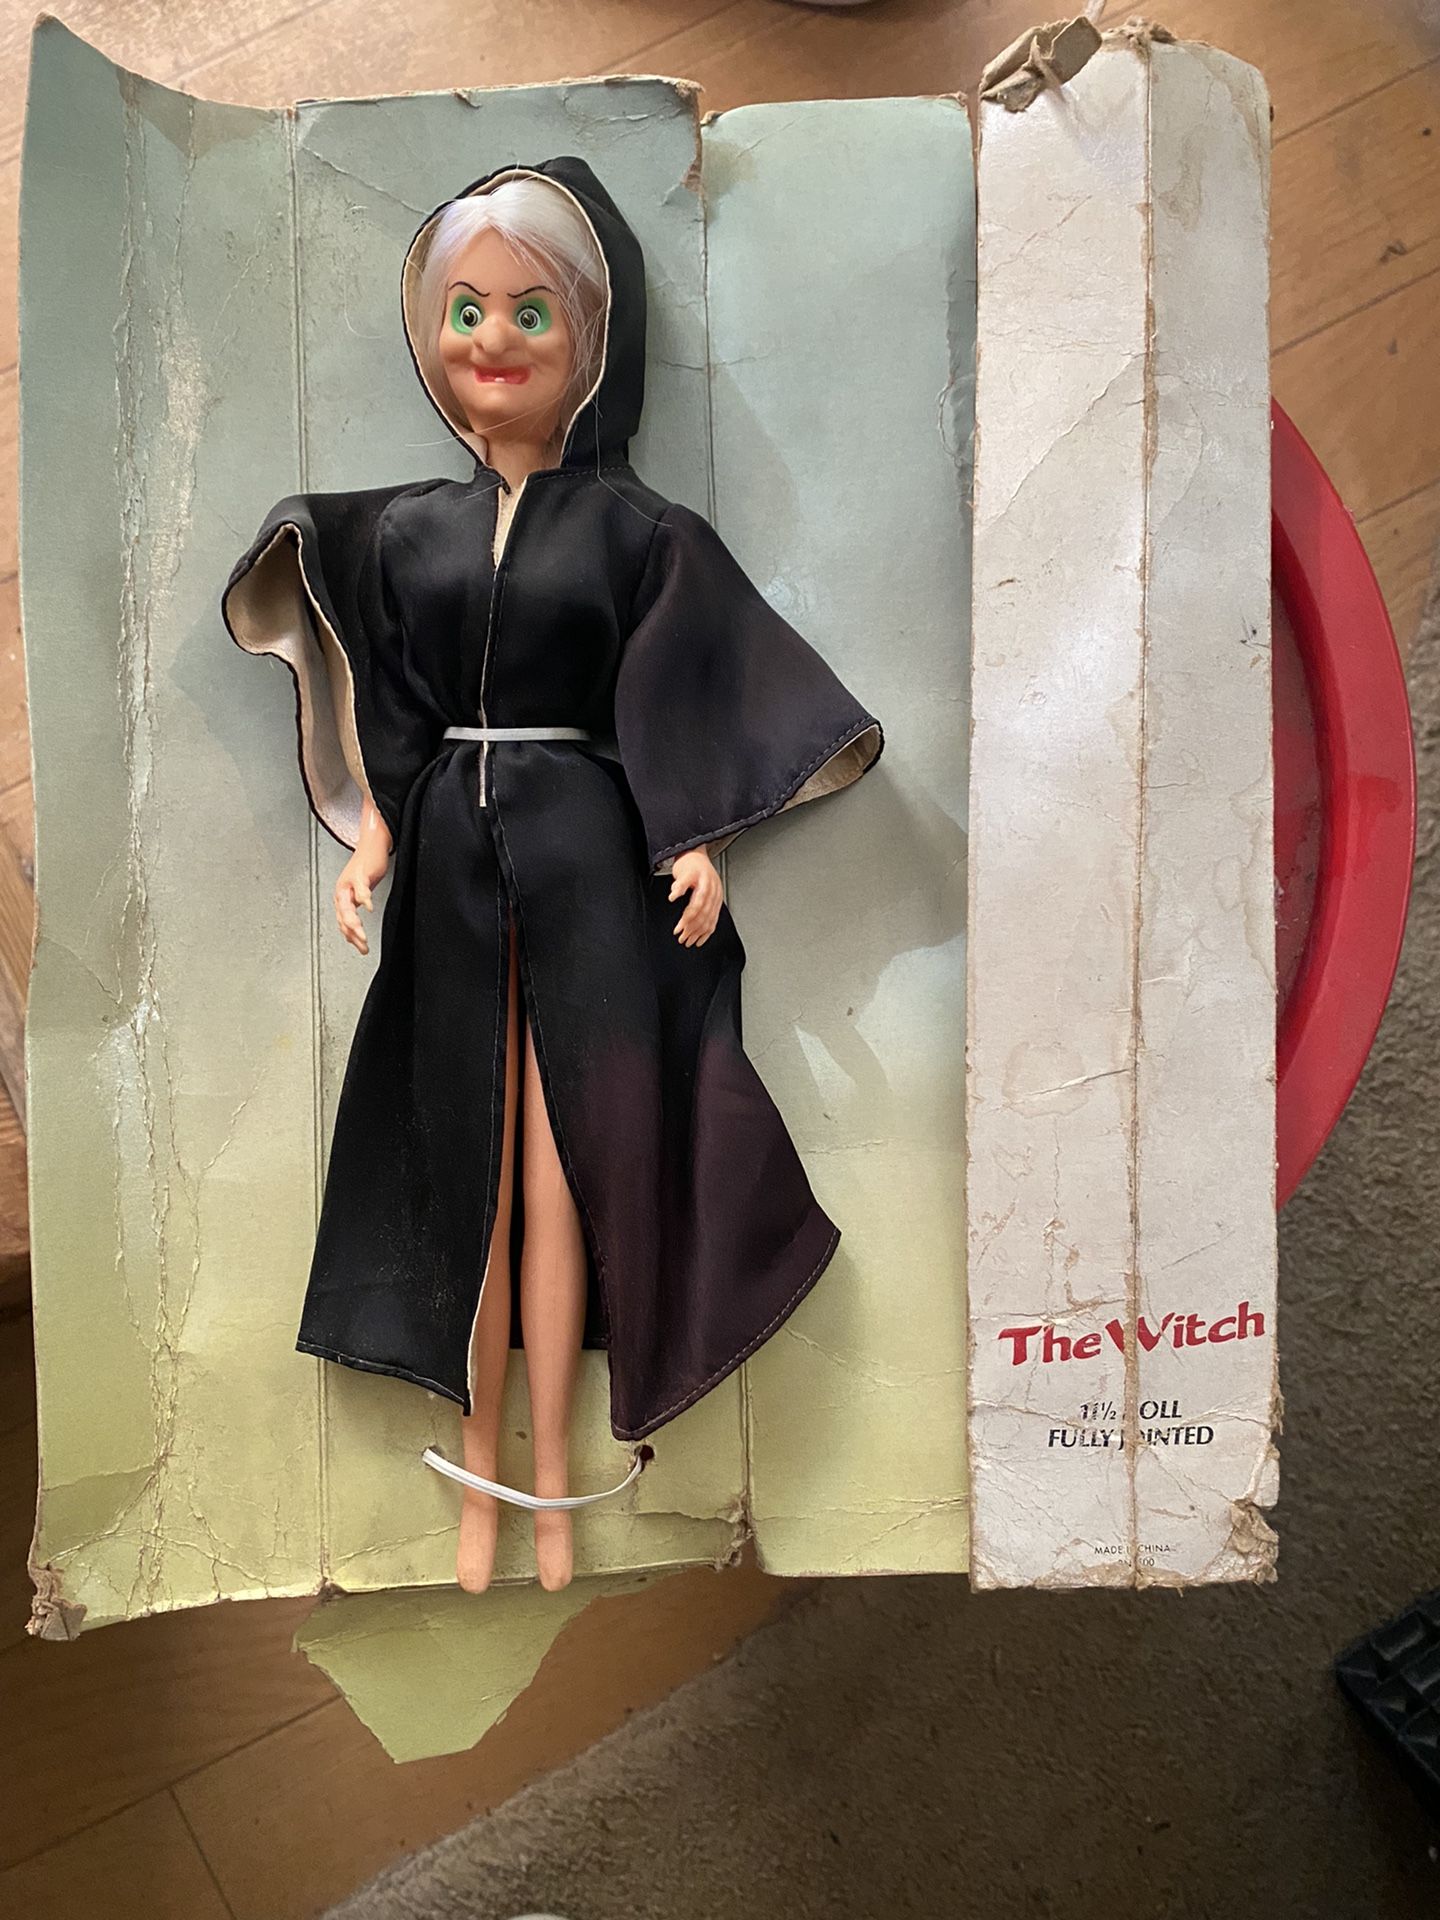 The Original The WitchFully Jointed  By Walt Disney She Was Kept In Awesome Shape Just Her Box Didn’t Make It Over The Years!😥